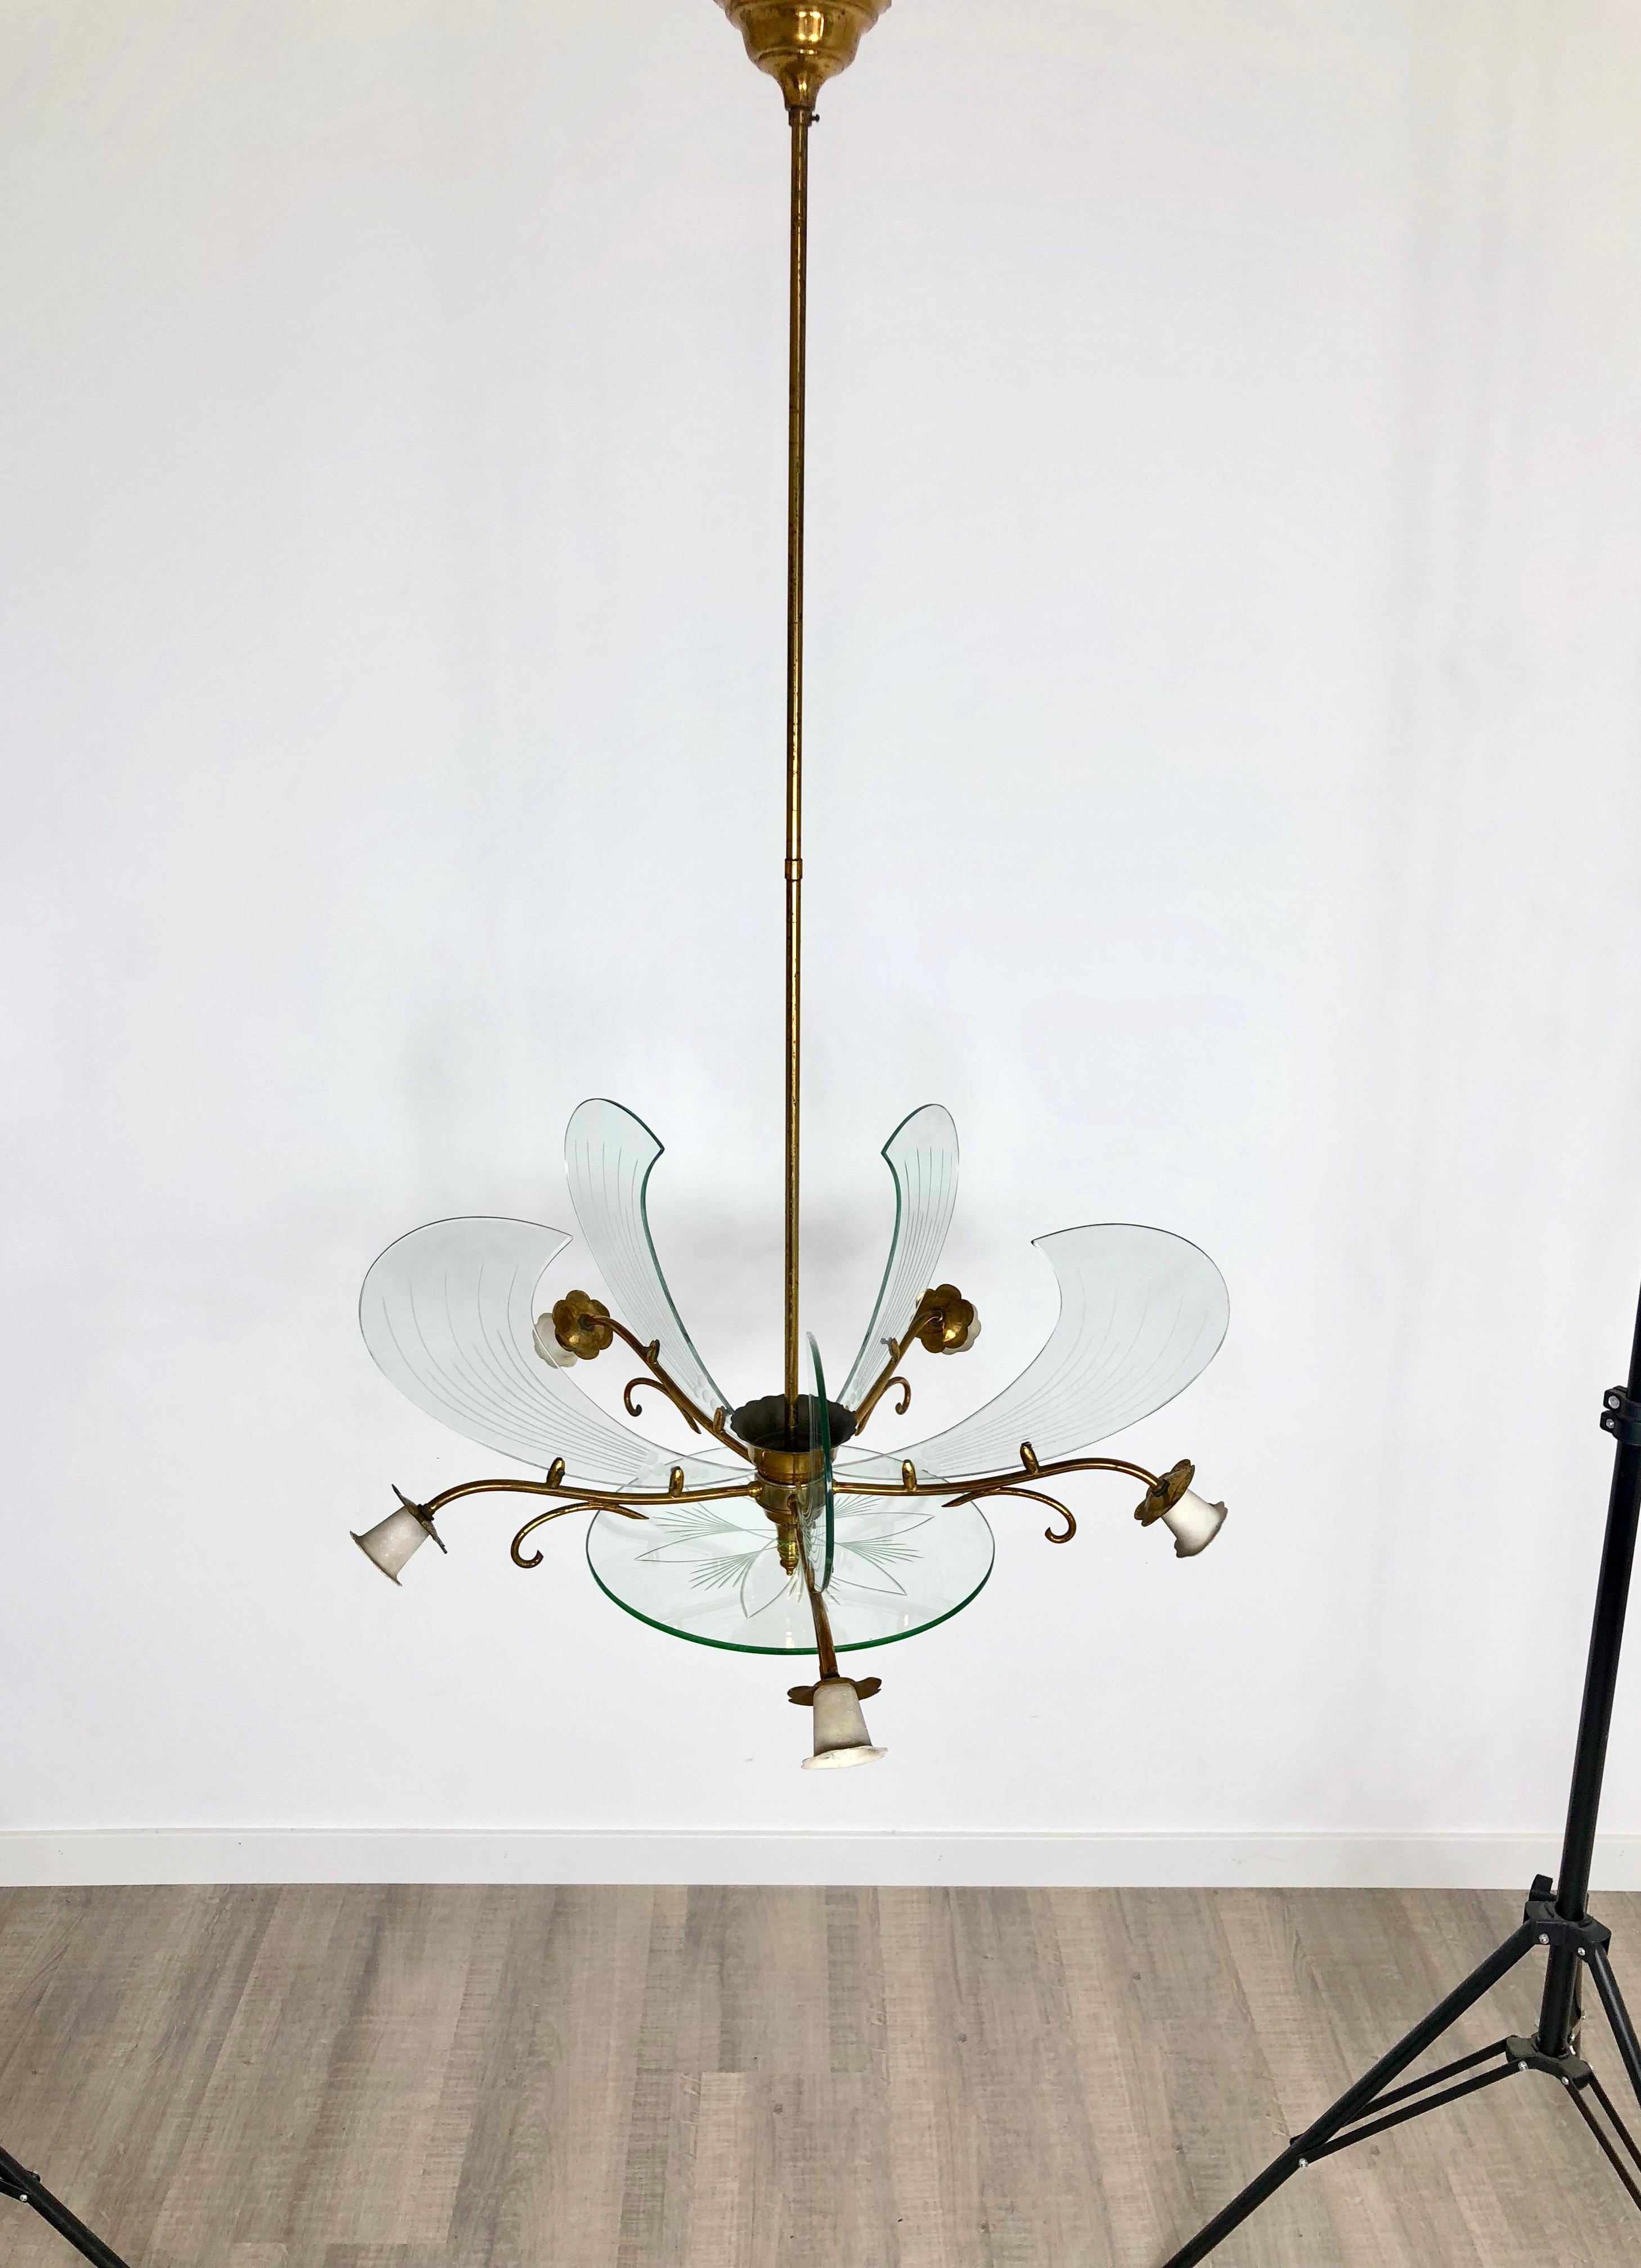 Chandelier by Fontana Arte made in the shape of a flower with glass petals and brass stem and thorns. The glass is embellished with floral details and it features five light bulbs. Made in Italy, circa 1950.
As the photos show, the brass shows time